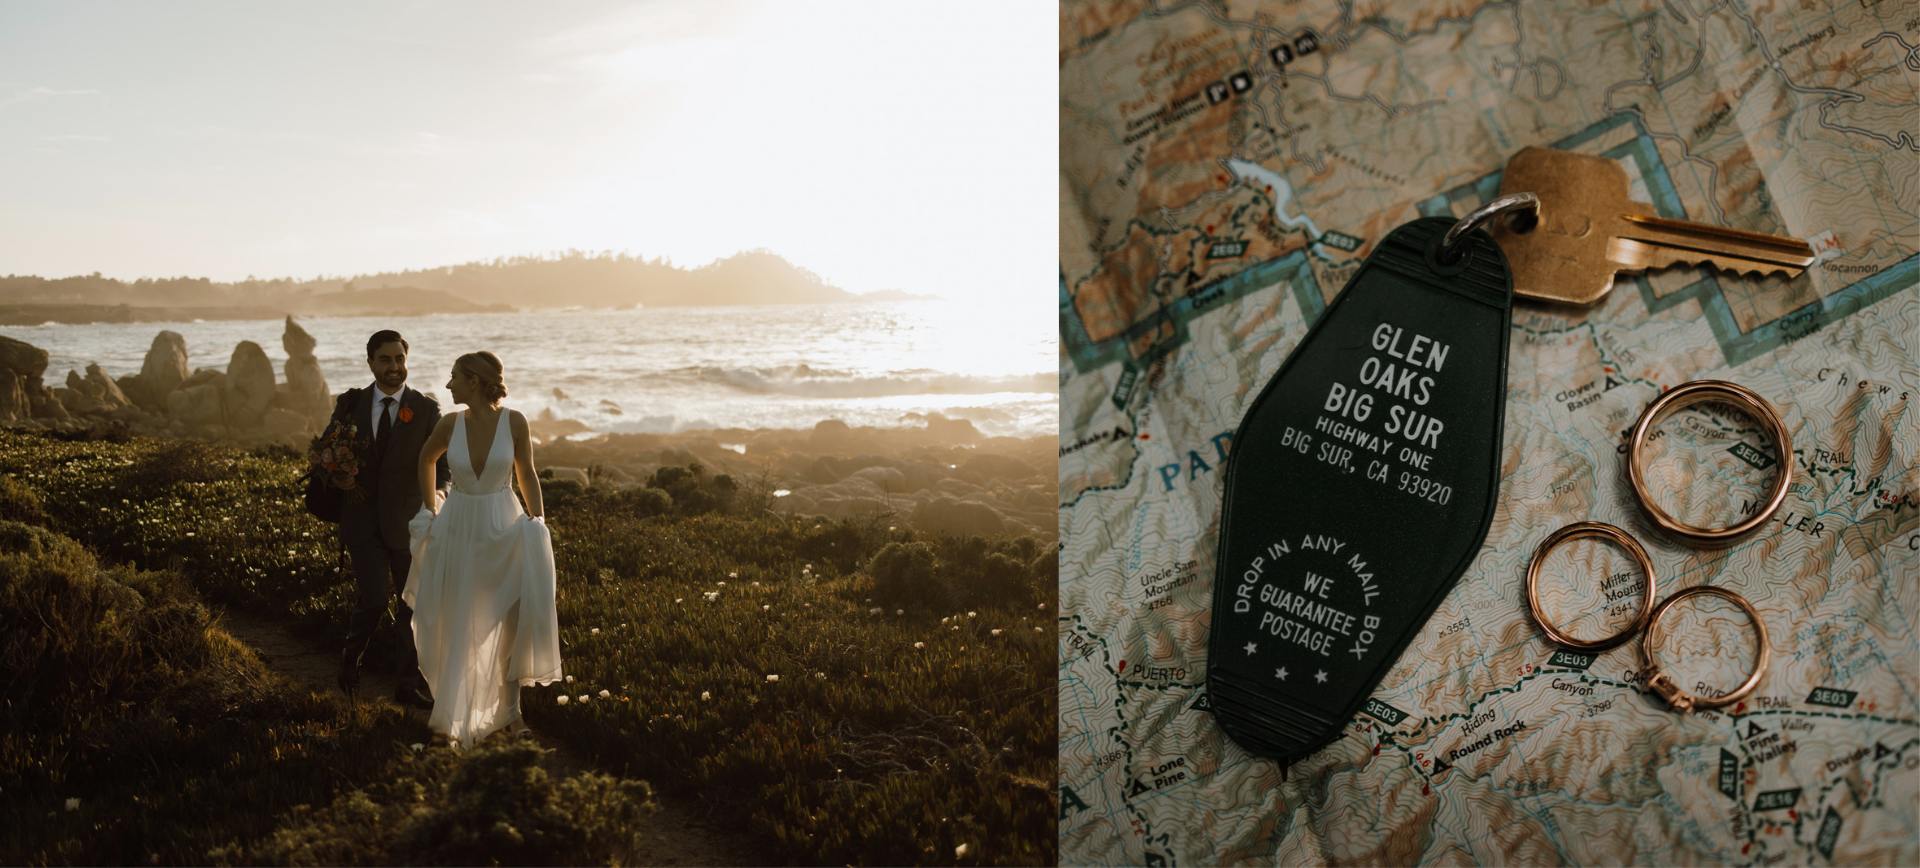 elopement package in California, big sur - wedding photos at the beach + detail shot of wedding rings